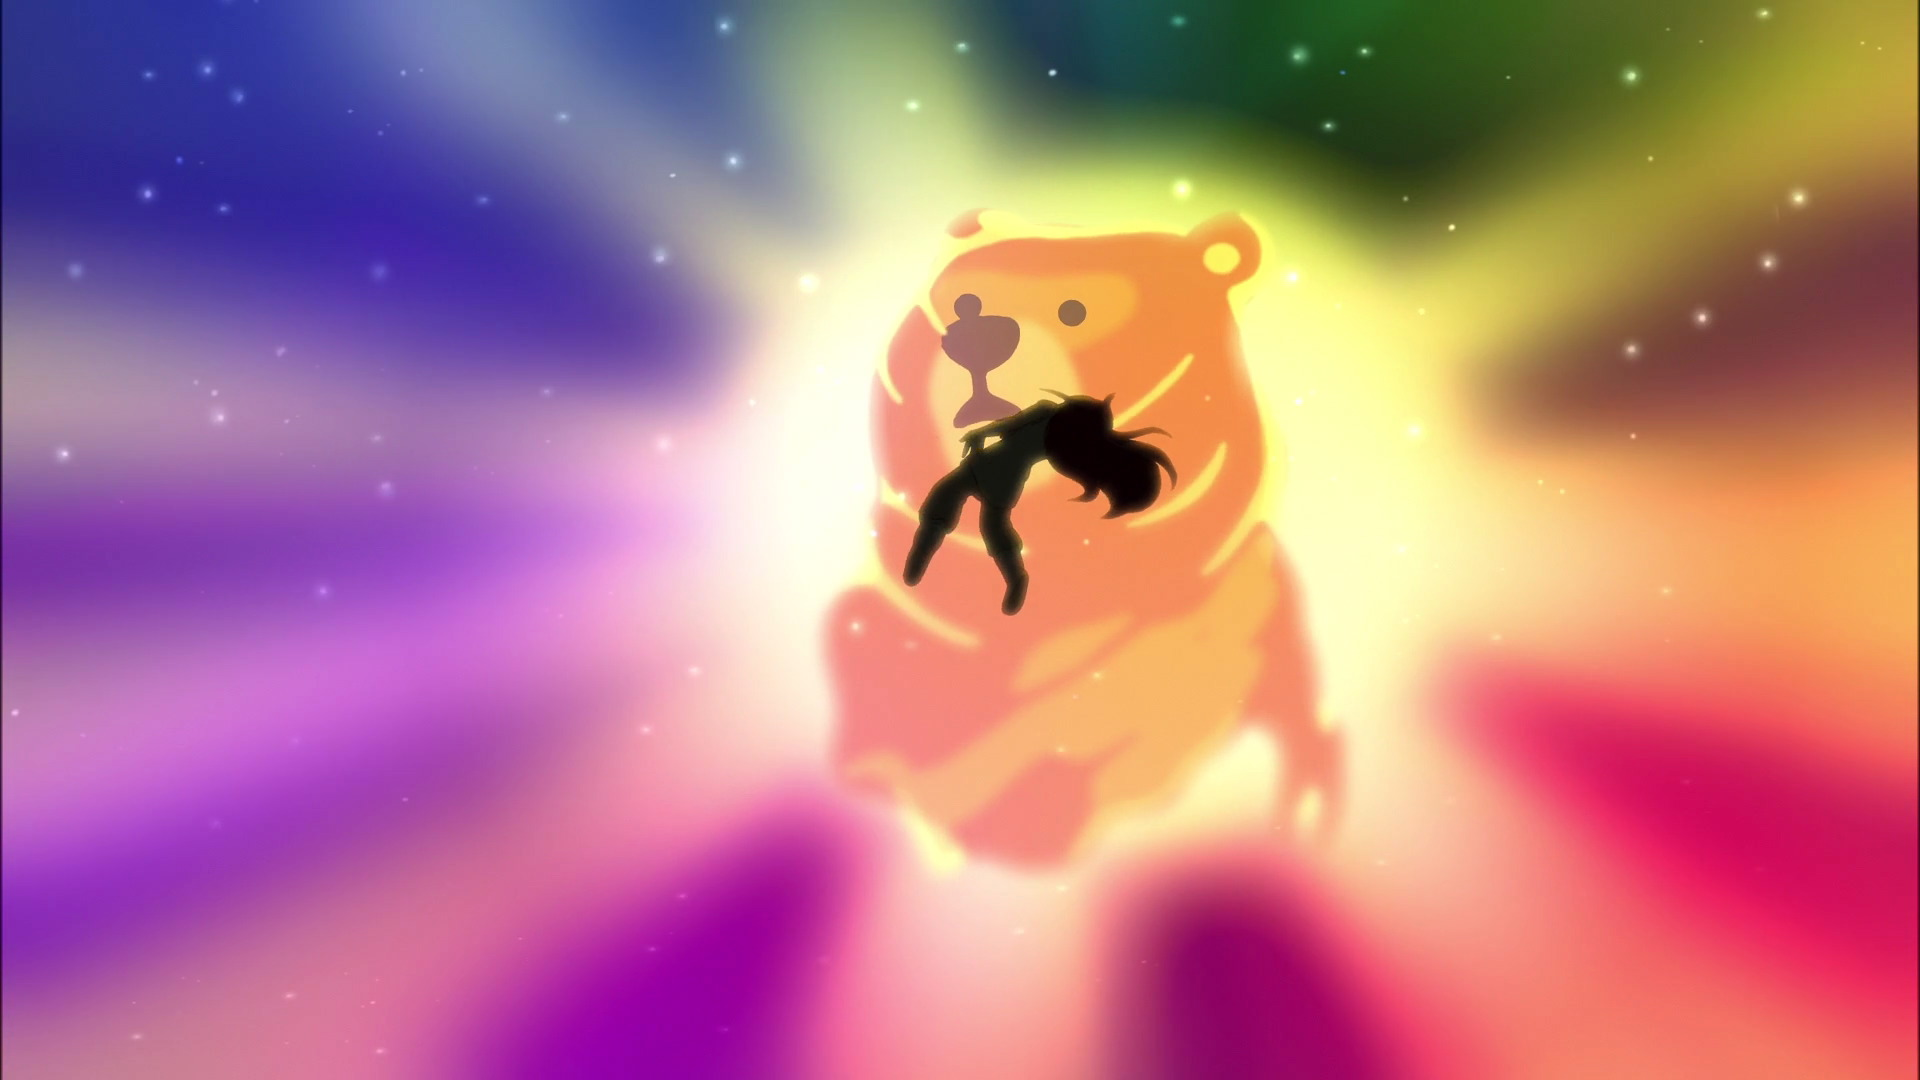 brother bear and brother bear 2